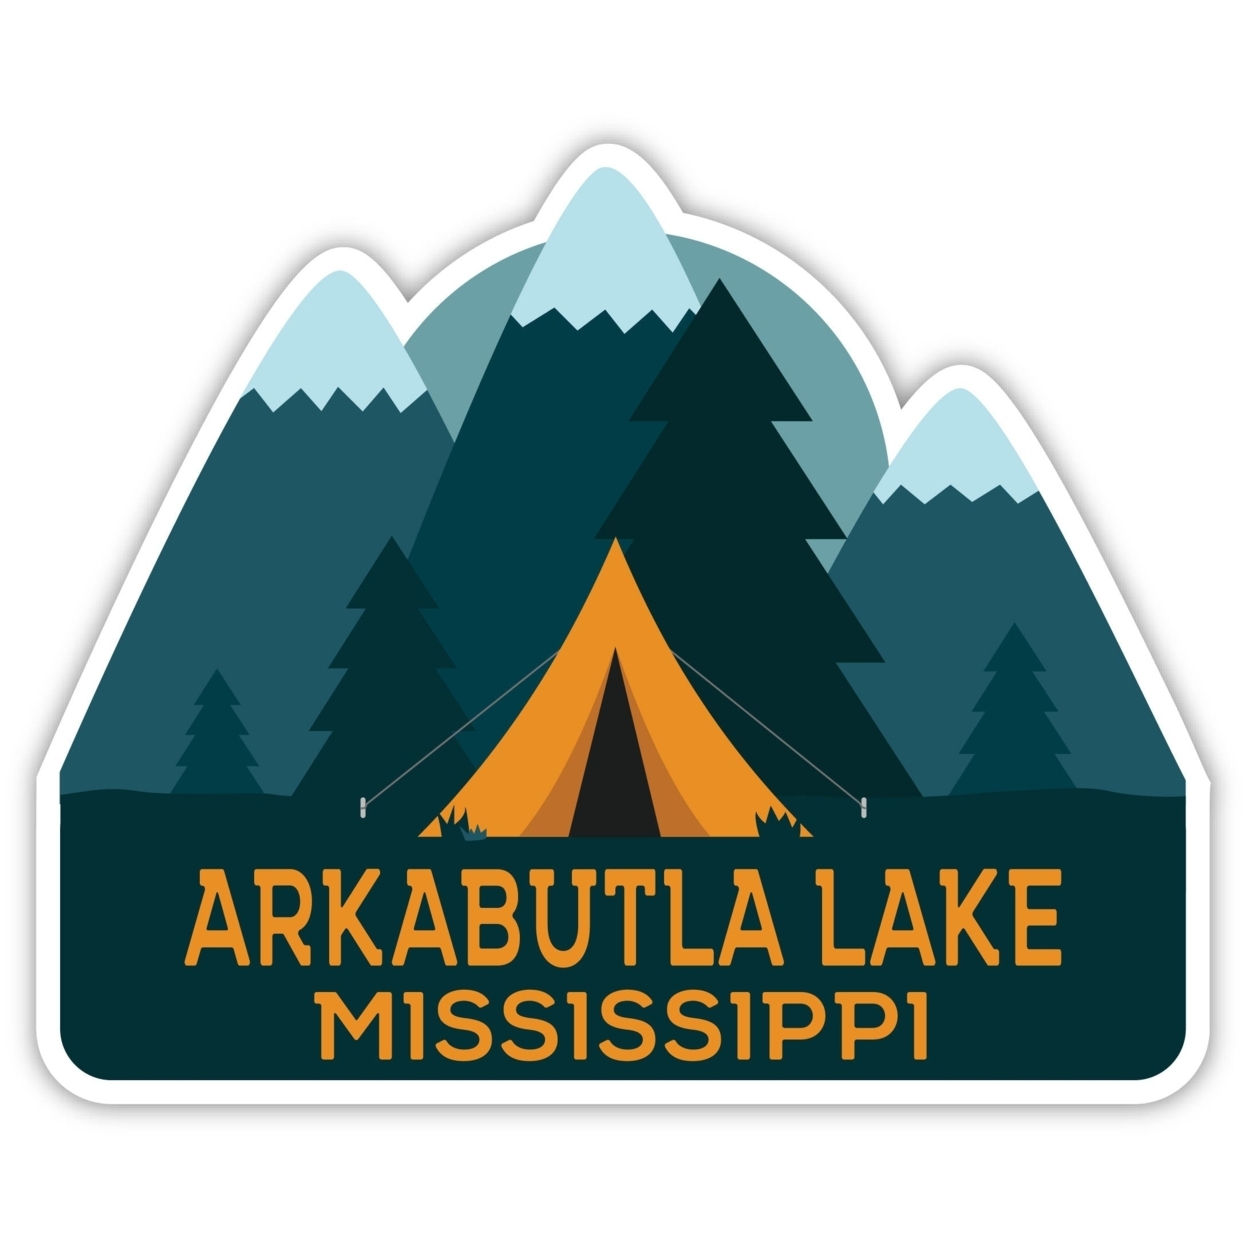 Arkabutla Lake Mississippi Souvenir Decorative Stickers (Choose Theme And Size) - 4-Pack, 6-Inch, Tent